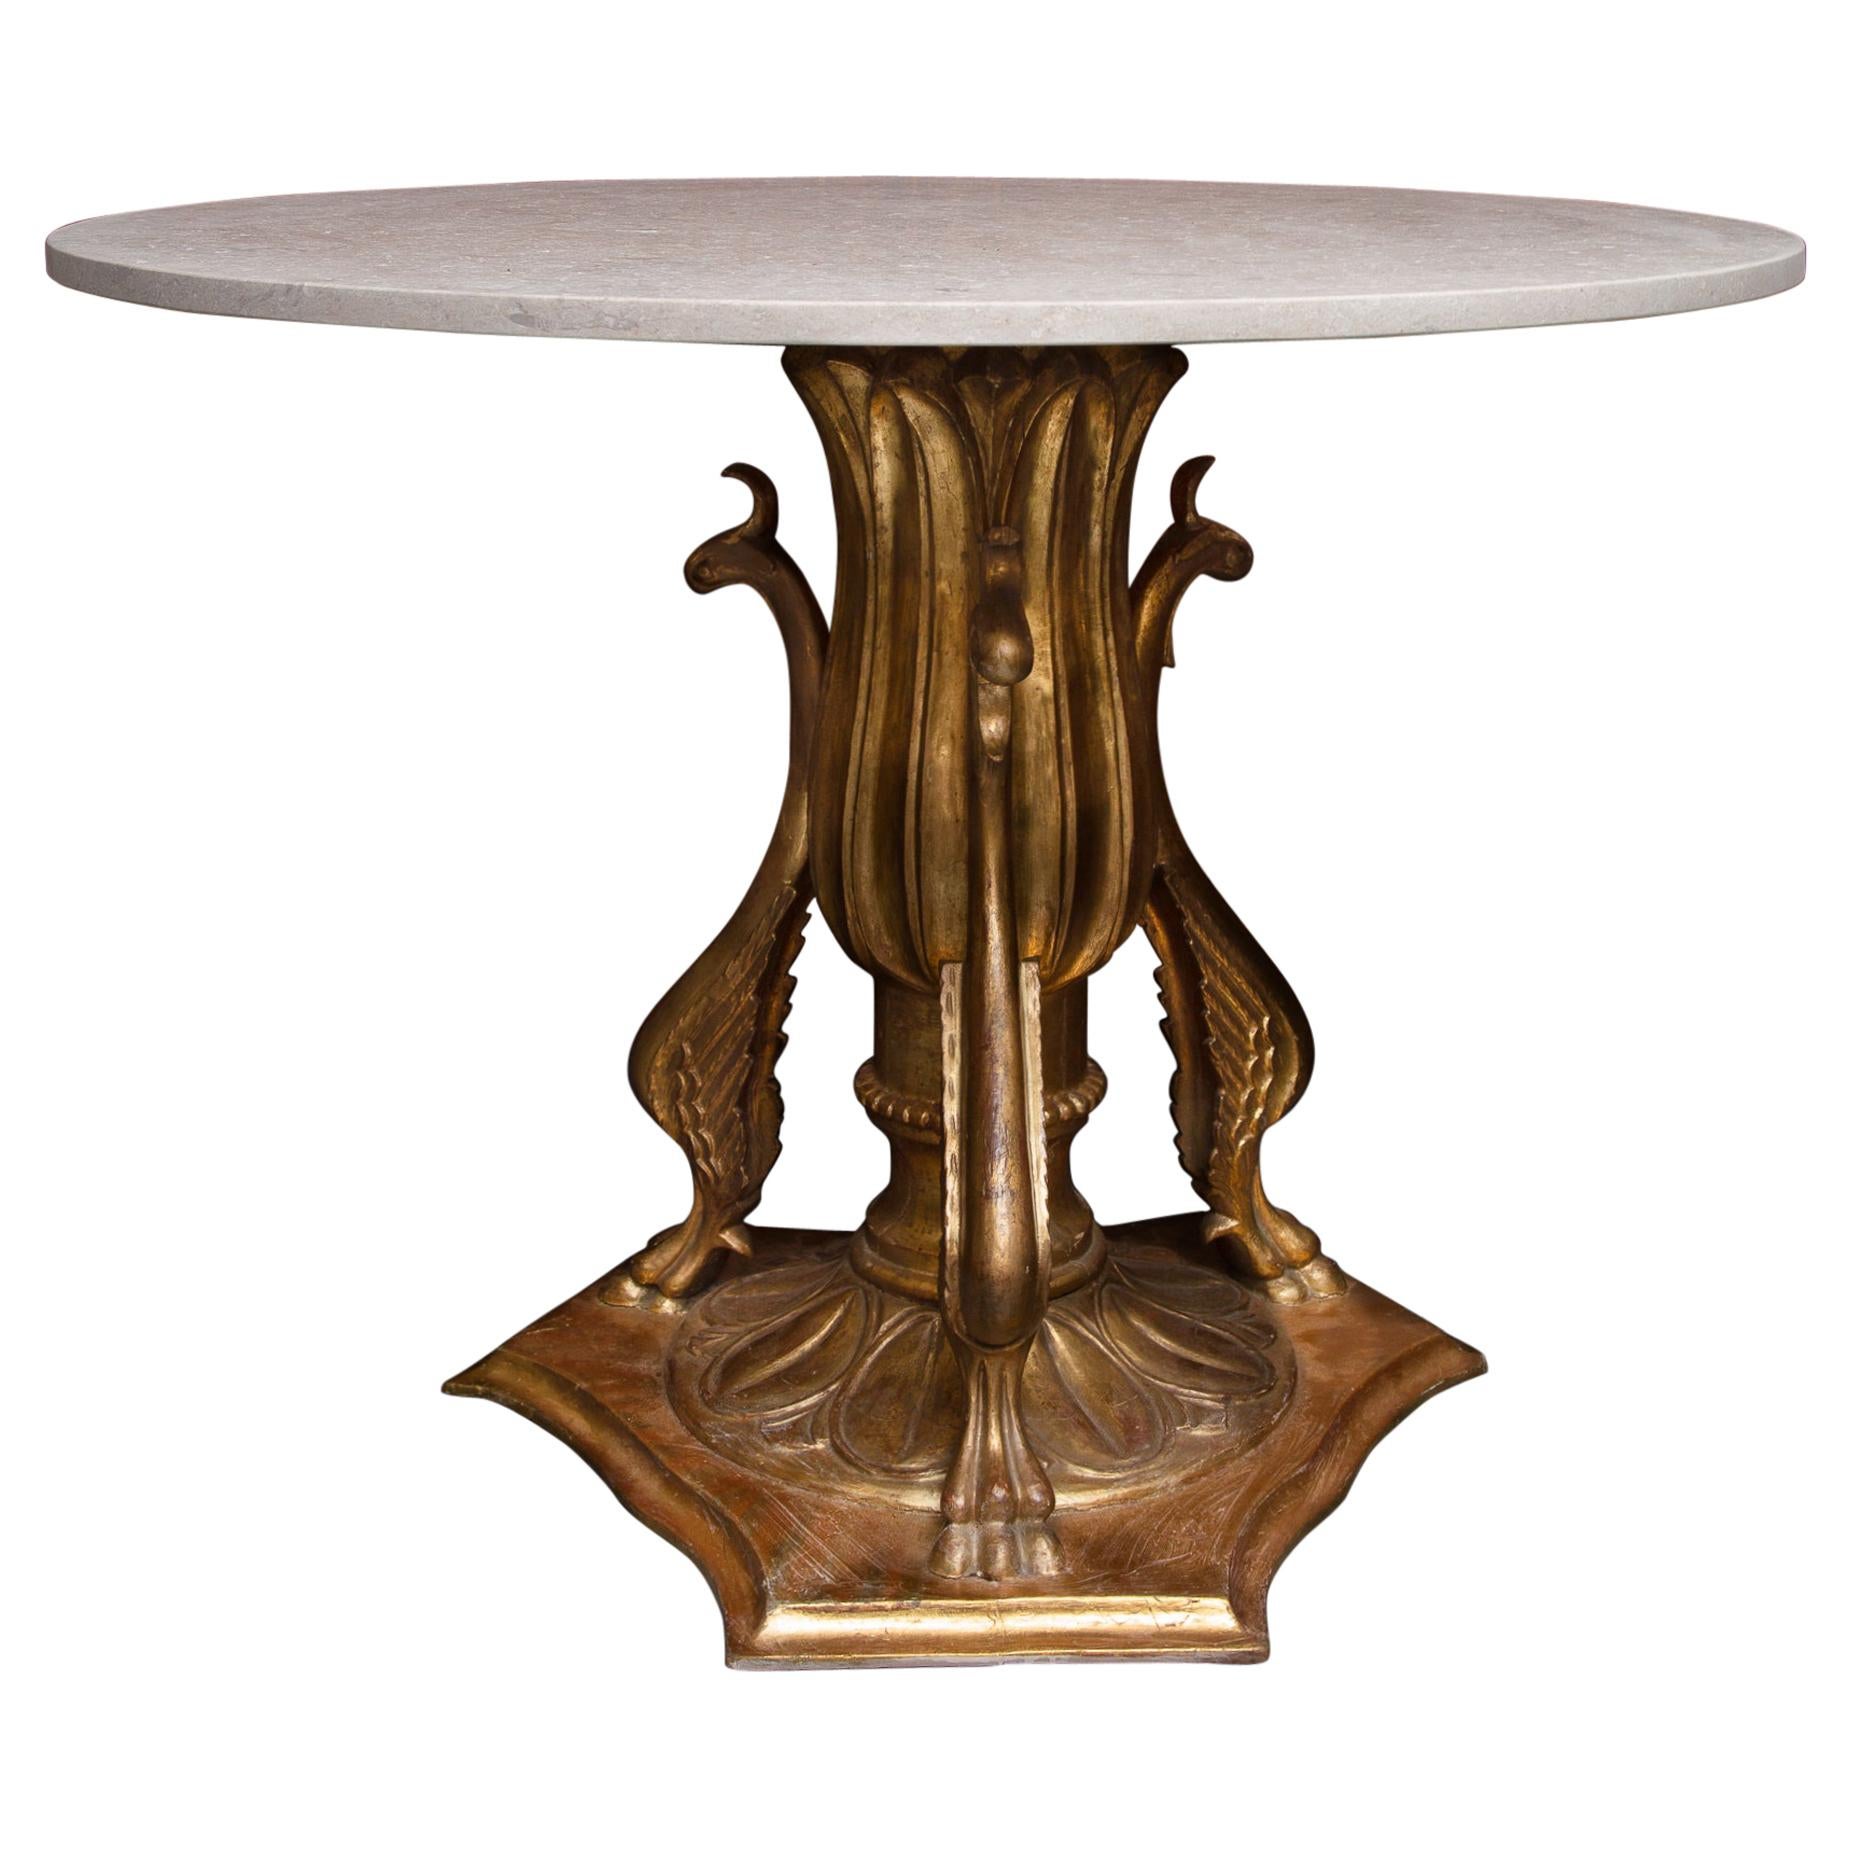 19th Century Italian Giltwood Center Table with Later Limestone Top